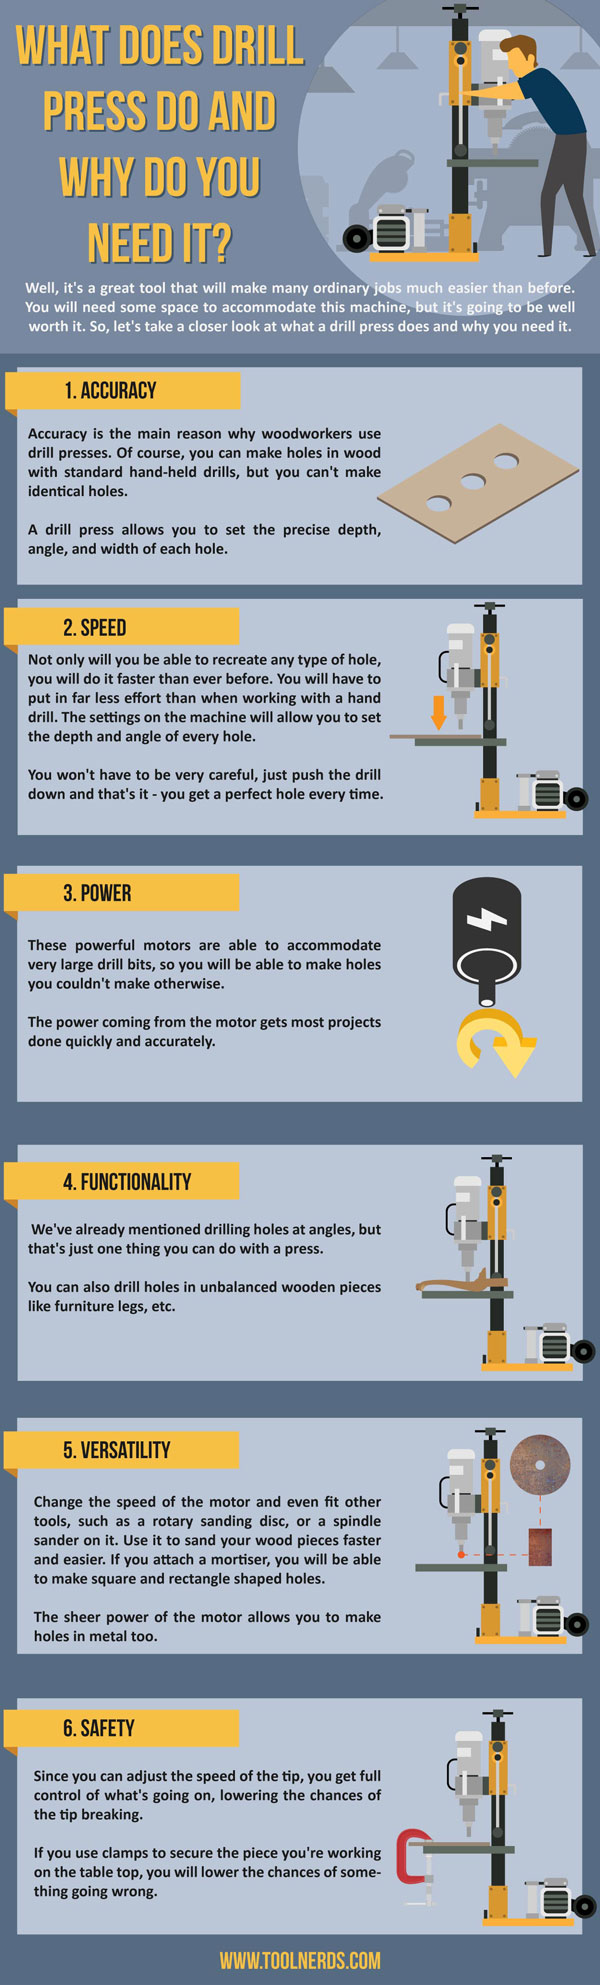 What Does Drill Press Do and Why Do You Need it Infographic